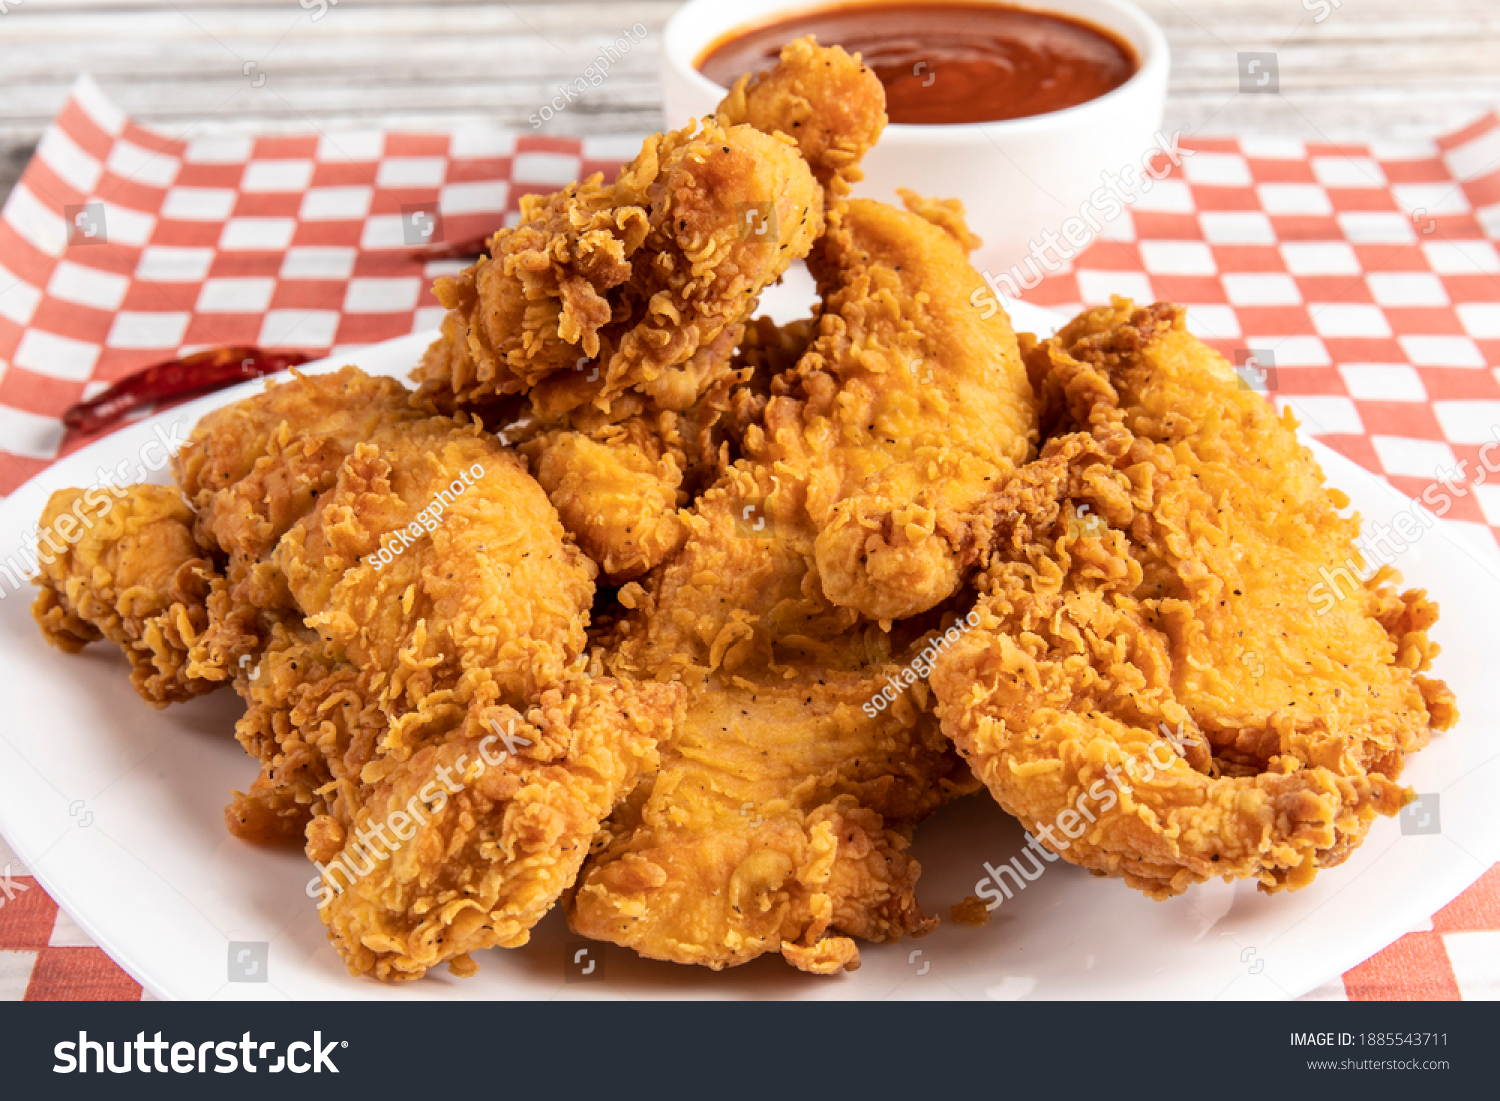 deep fried southern style breaded chicken tenders or chicken fingers on a white plate with dipping sauce #1885543711